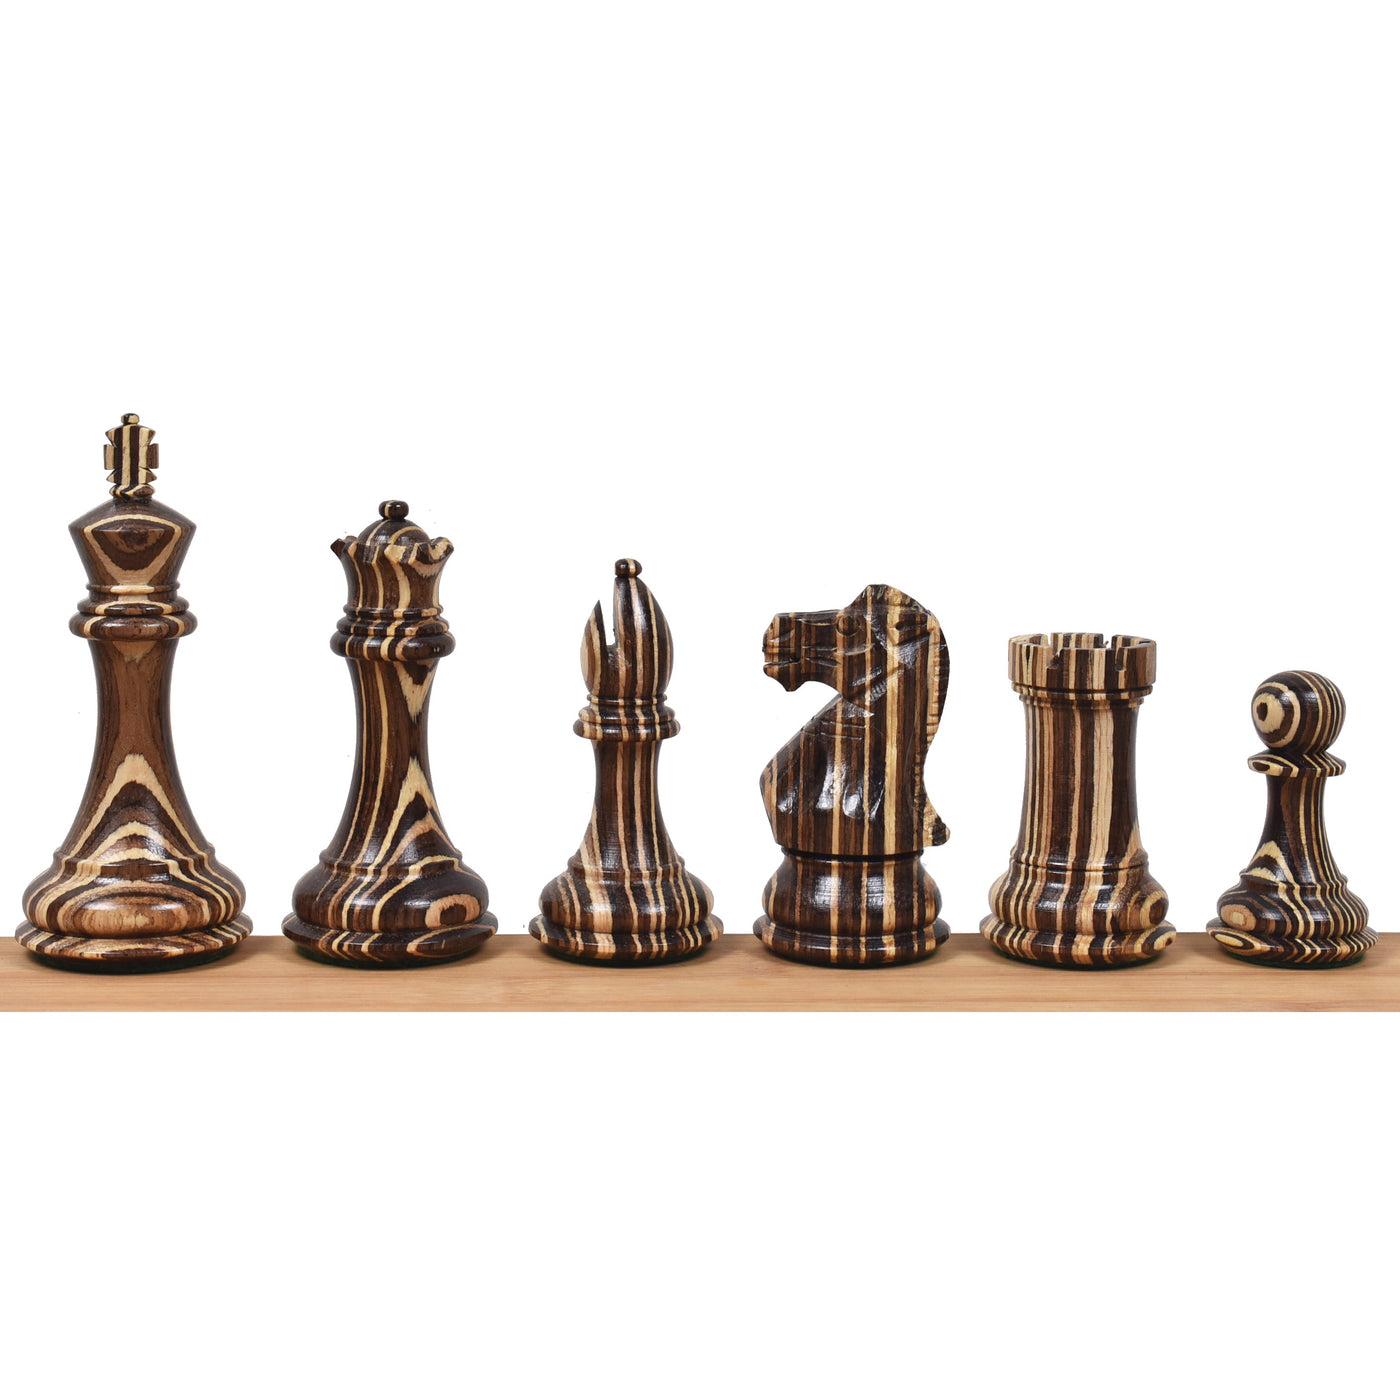 Professional Staunton Chess Pieces Only set